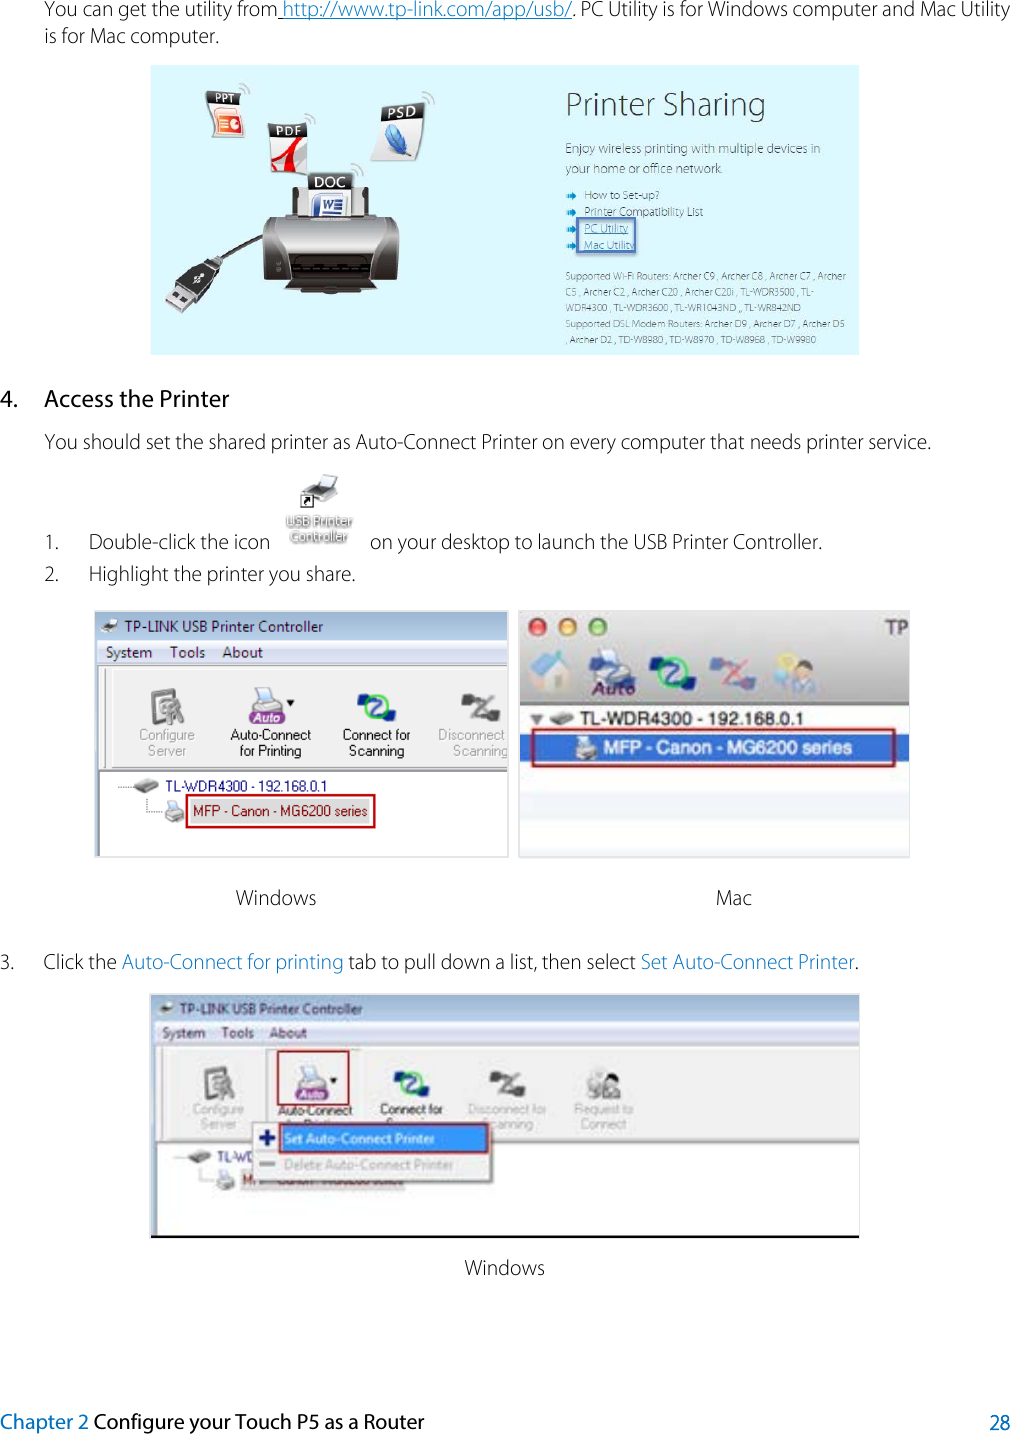  You can get the utility from http://www.tp-link.com/app/usb/. PC Utility is for Windows computer and Mac Utility is for Mac computer.  4. Access the Printer You should set the shared printer as Auto-Connect Printer on every computer that needs printer service. 1. Double-click the icon   on your desktop to launch the USB Printer Controller. 2. Highlight the printer you share.   Windows Mac 3. Click the Auto-Connect for printing tab to pull down a list, then select Set Auto-Connect Printer.  Windows Chapter 2 Configure your Touch P5 as a Router 28 